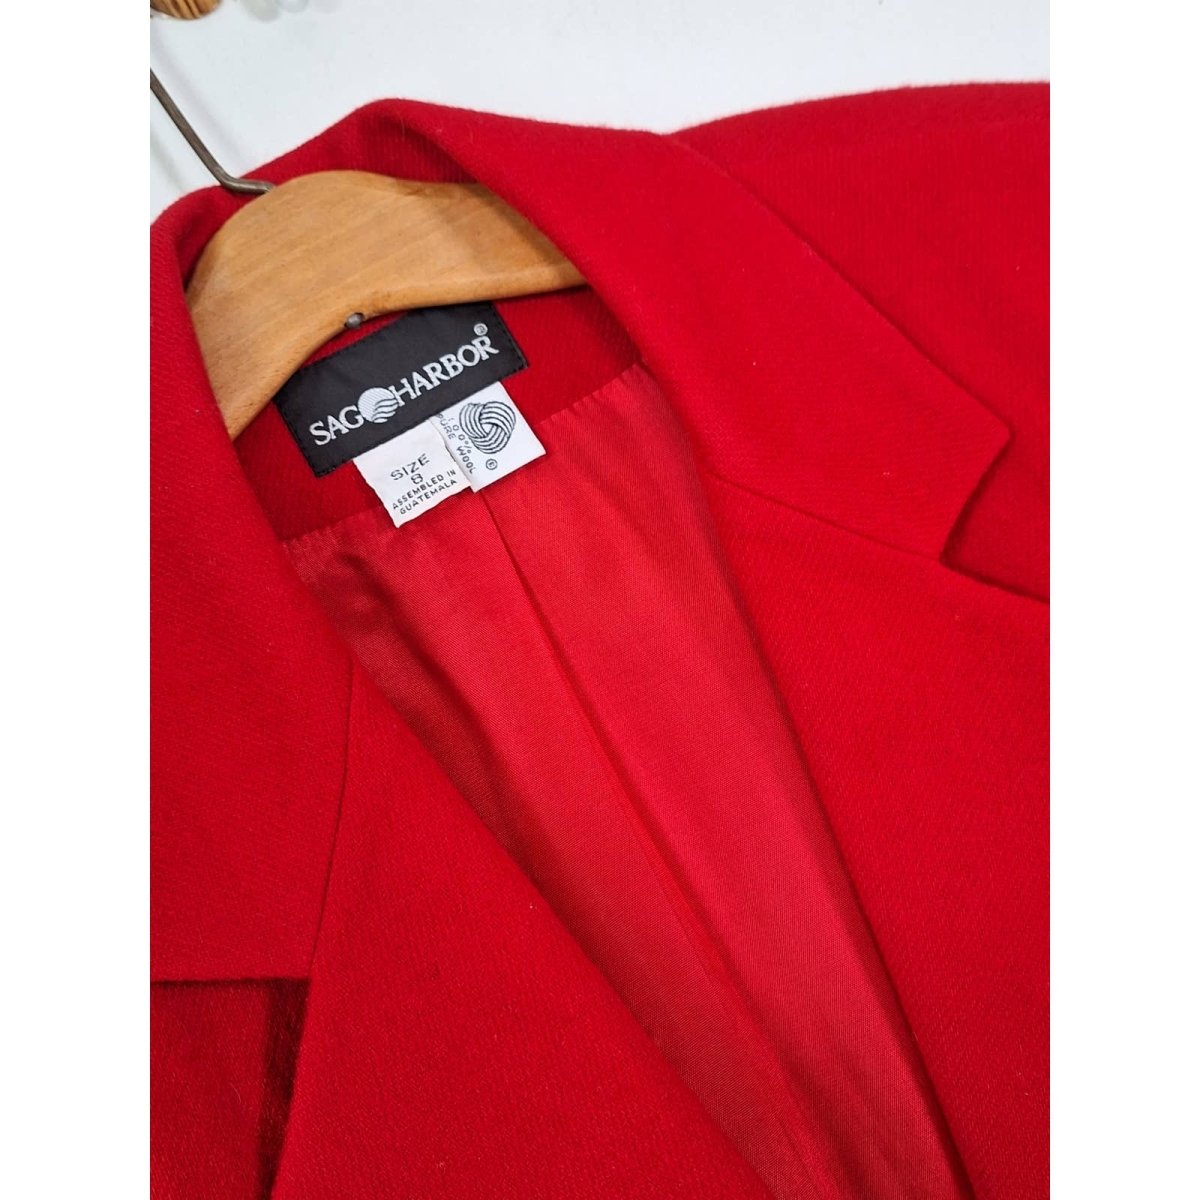 80s/90s Oversized Cherry Red Wool Blazer Size 8 Chest up to 44 - themallvintage The Mall Vintage